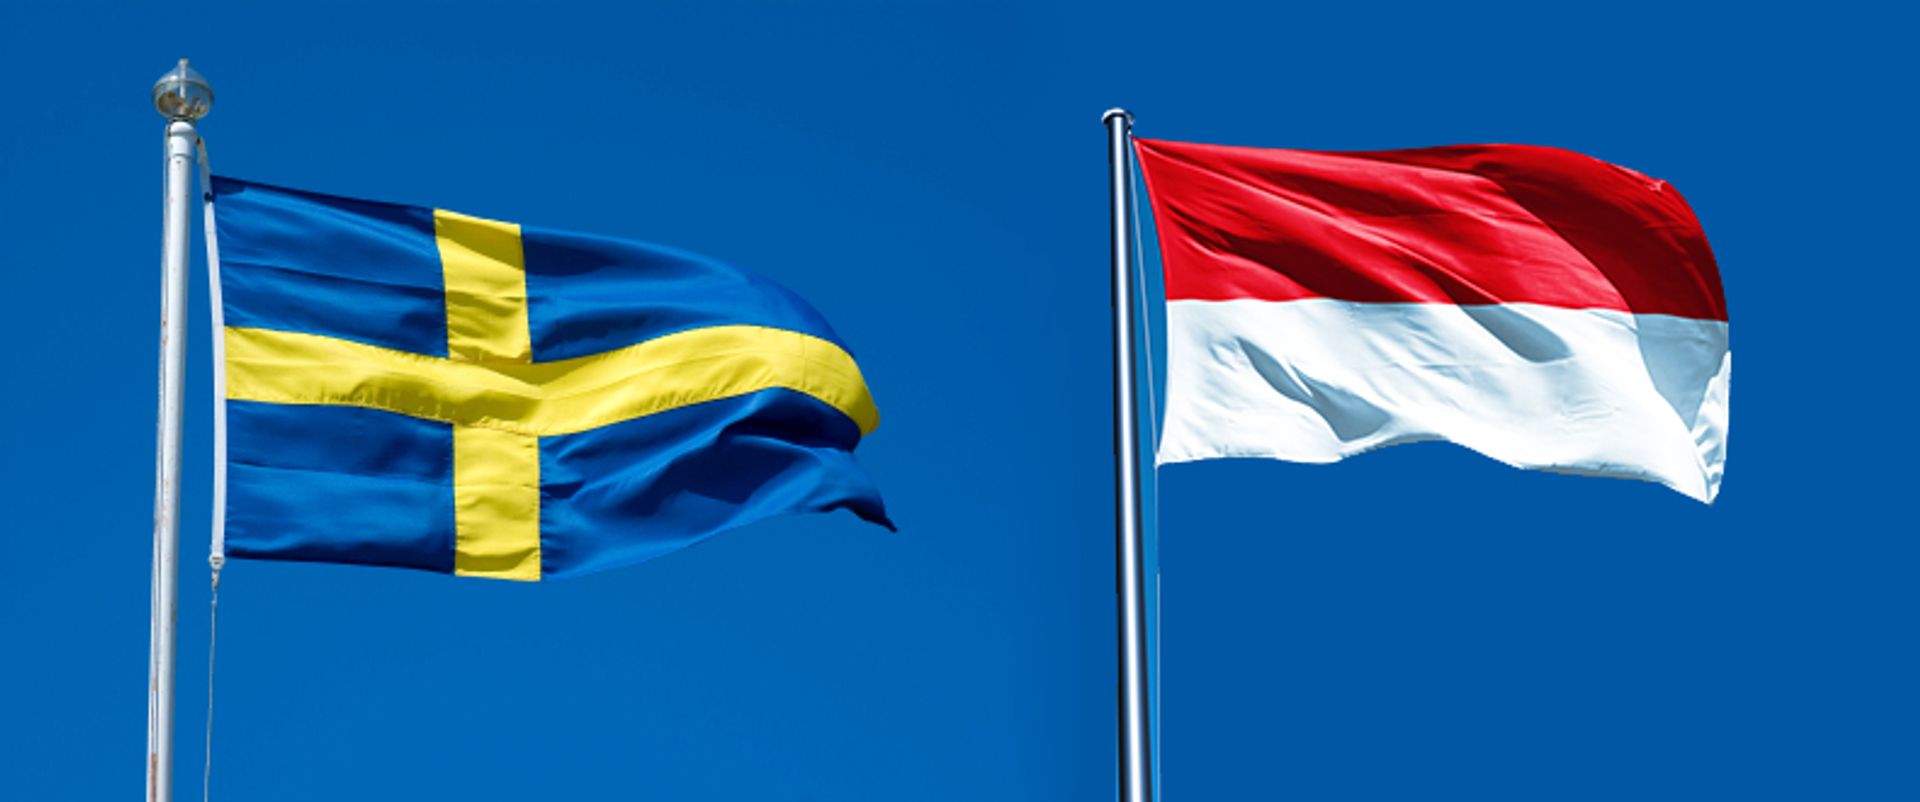 Sweden and Indonesia